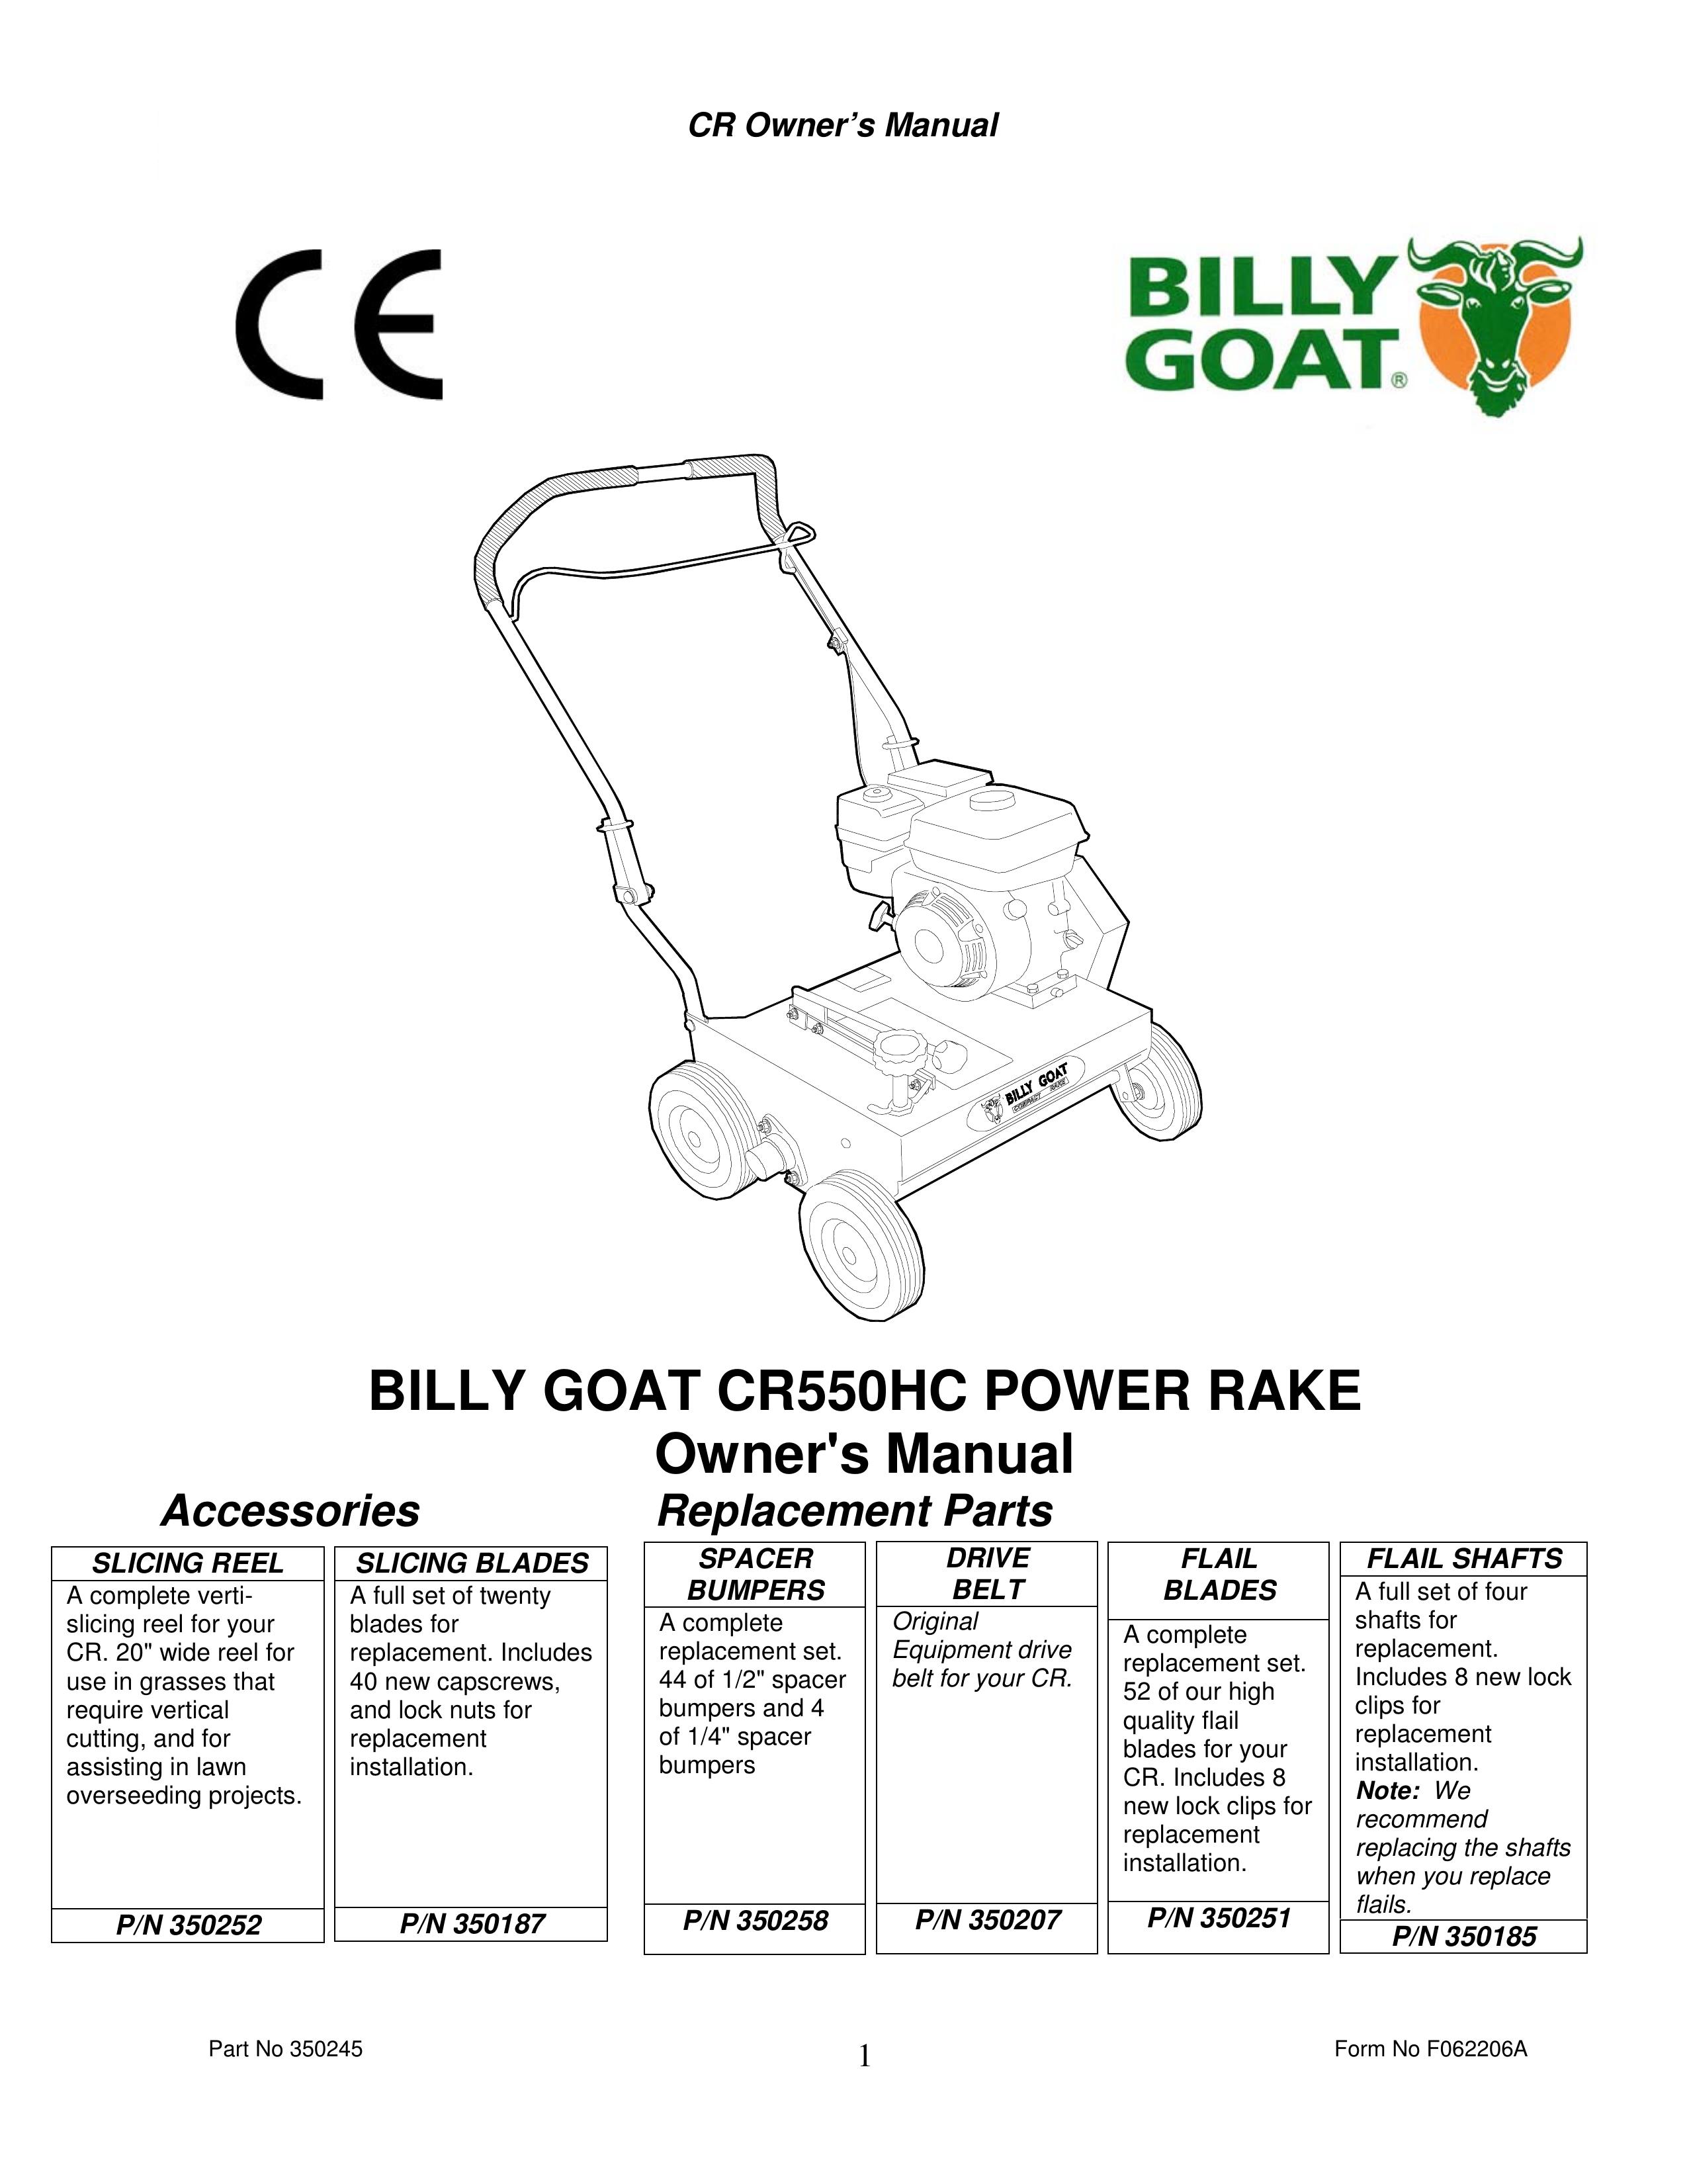 Billy Goat CR550HC Blower User Manual (Page 1)